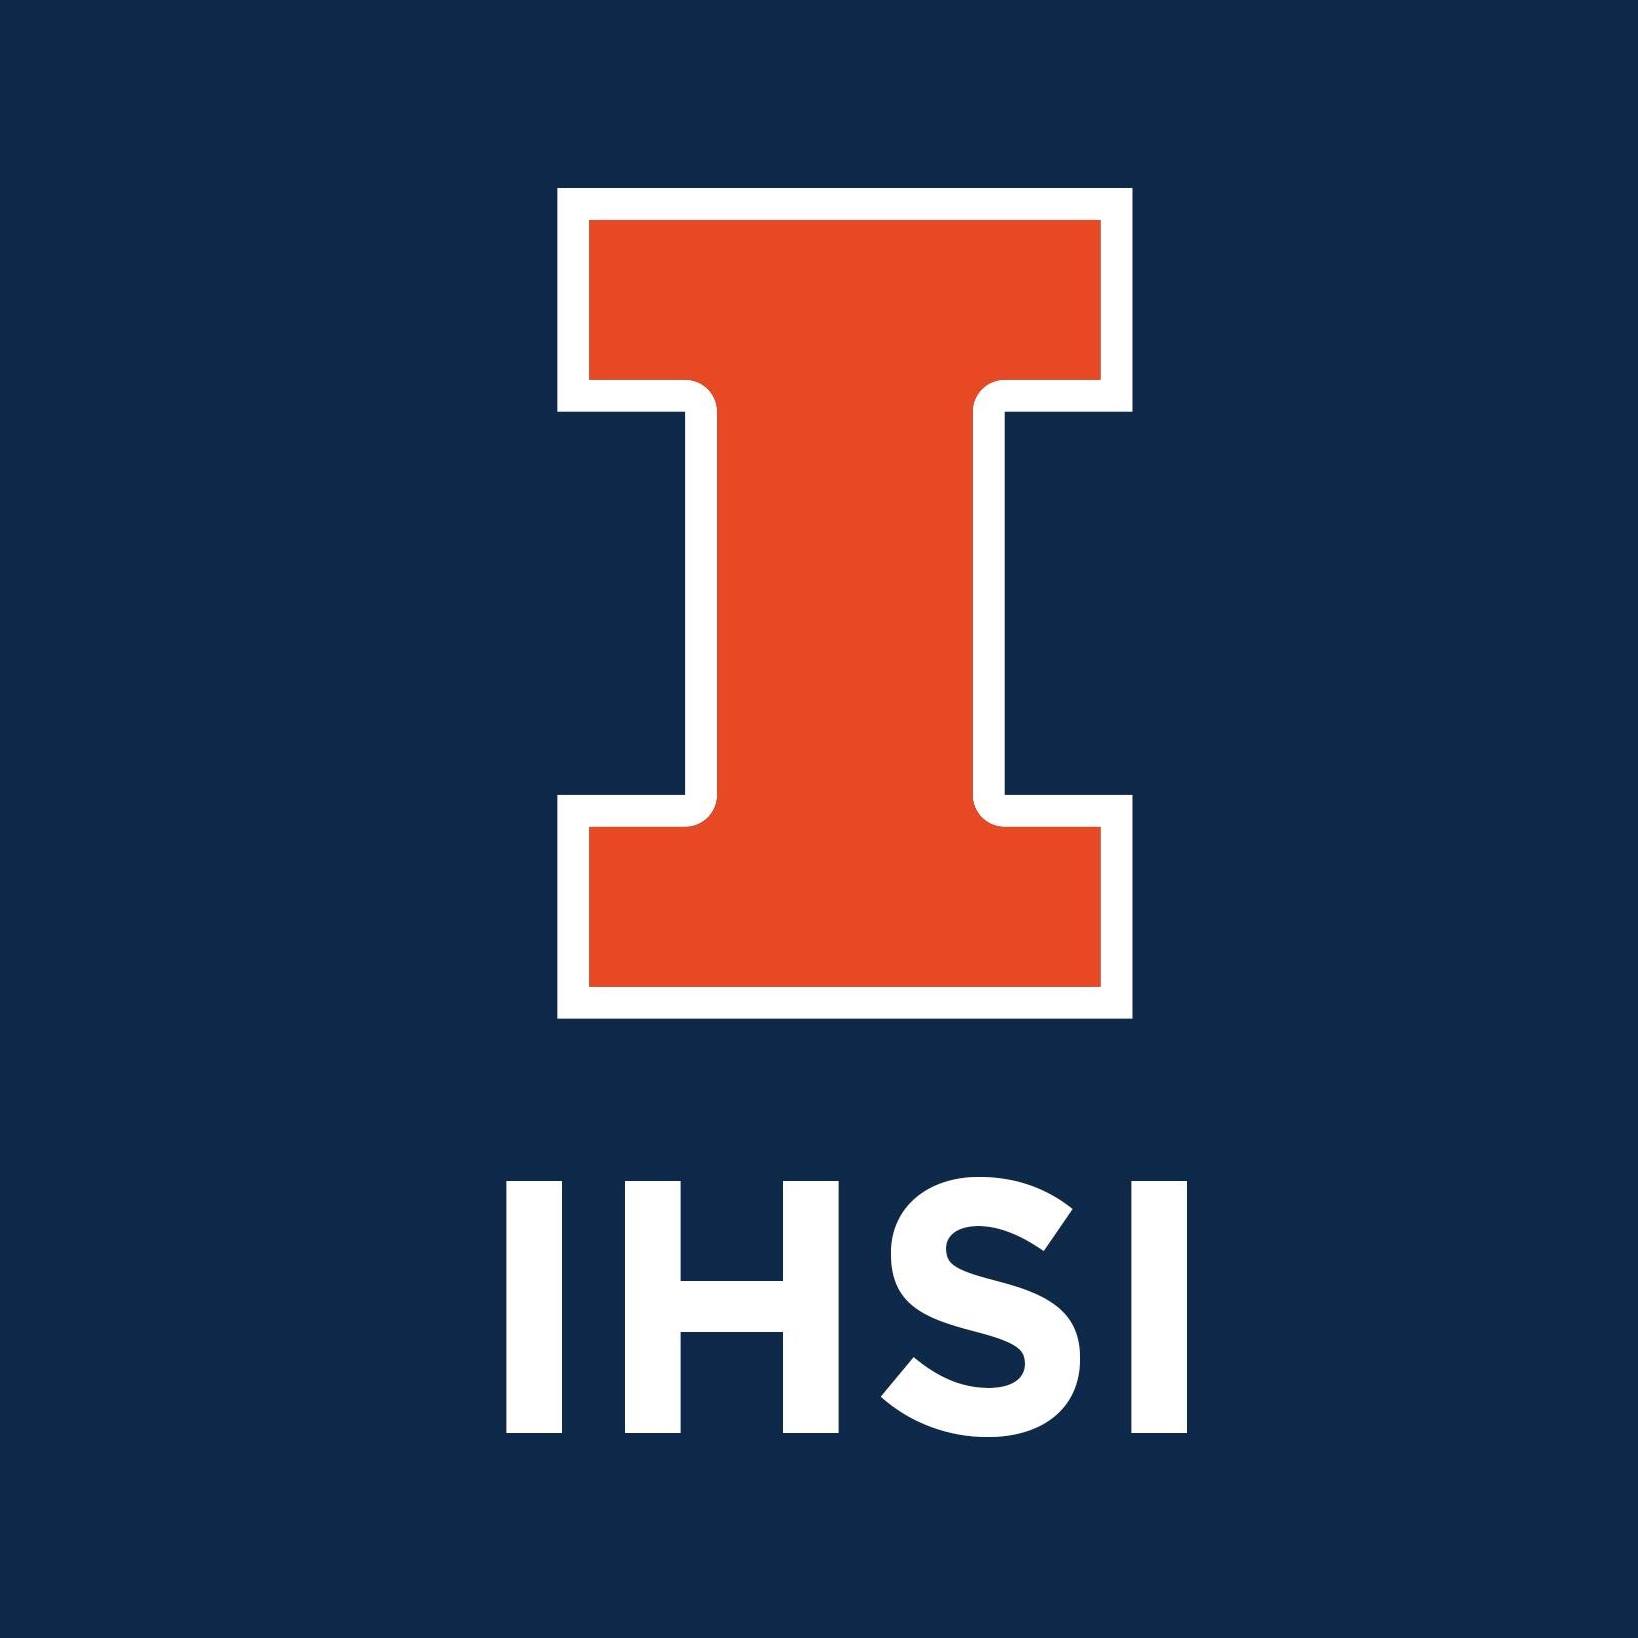 Graphic with a block I. Text below: IHSI